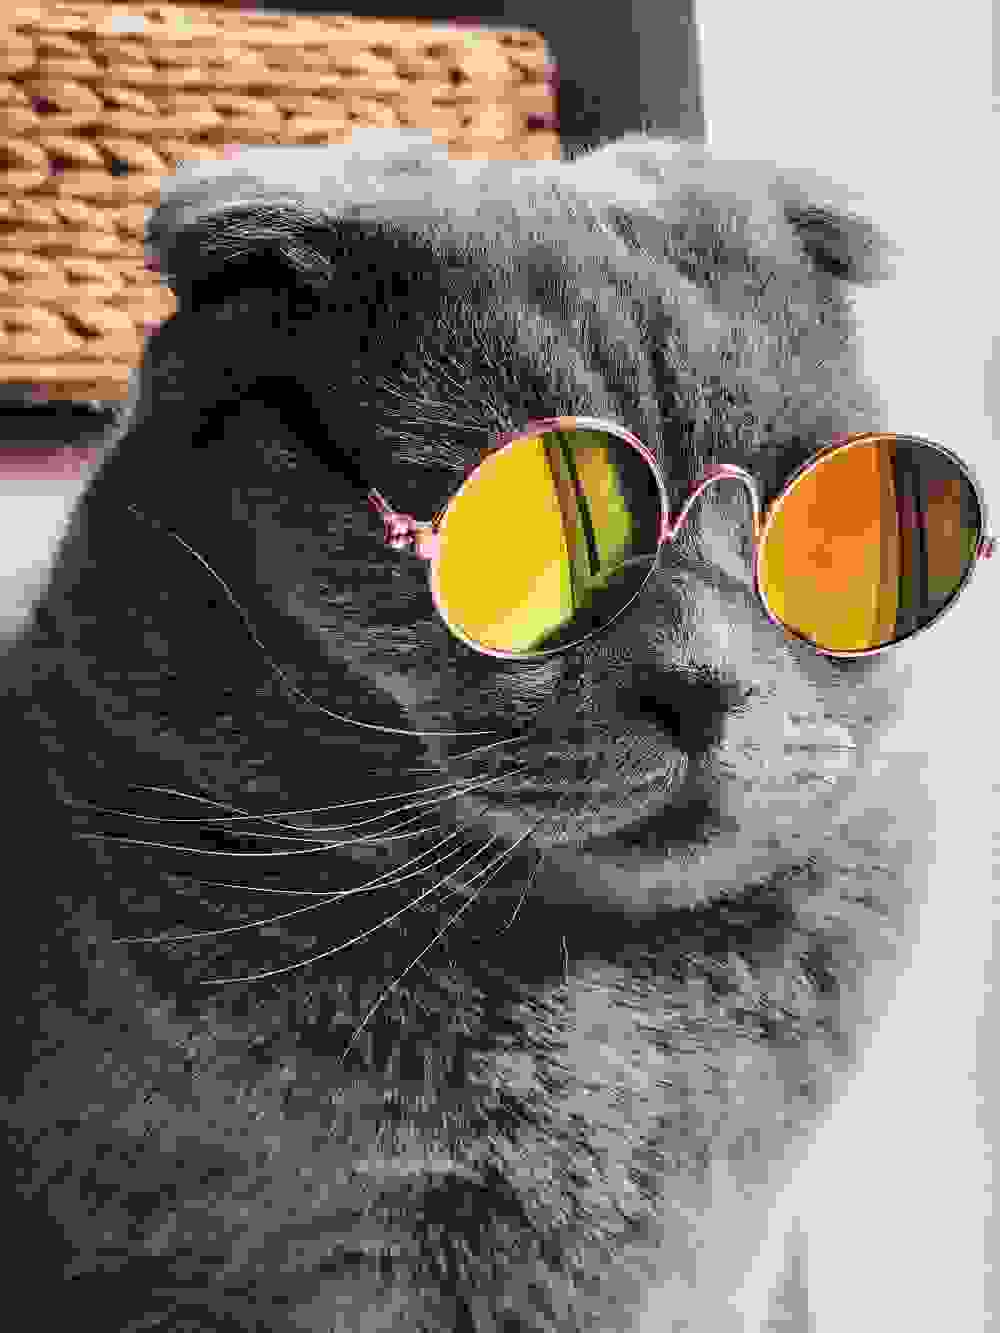 Cat in sunglasses - lowest quality